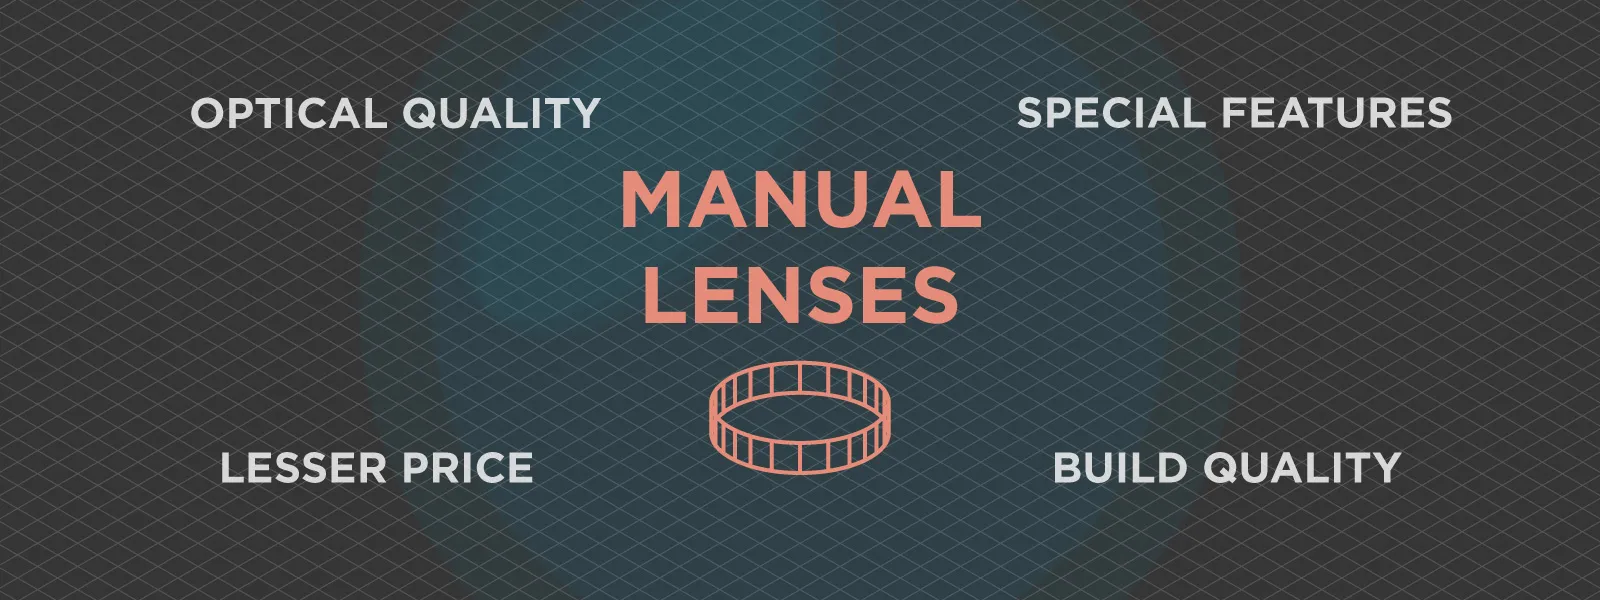 Manual-Lenses-Features